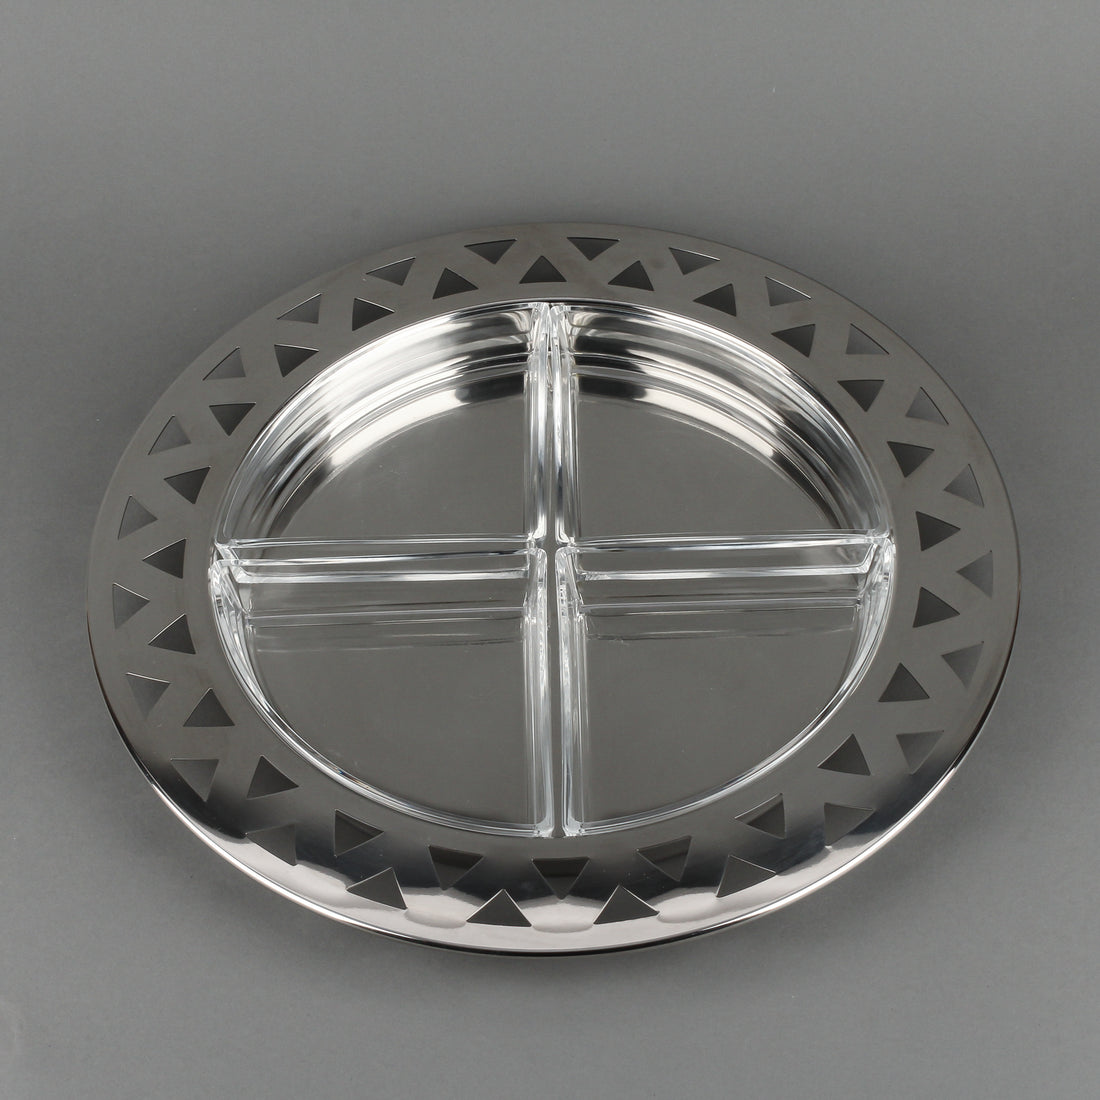 ALESSI KK23 Stainless Steel Tray with Glass Inserts